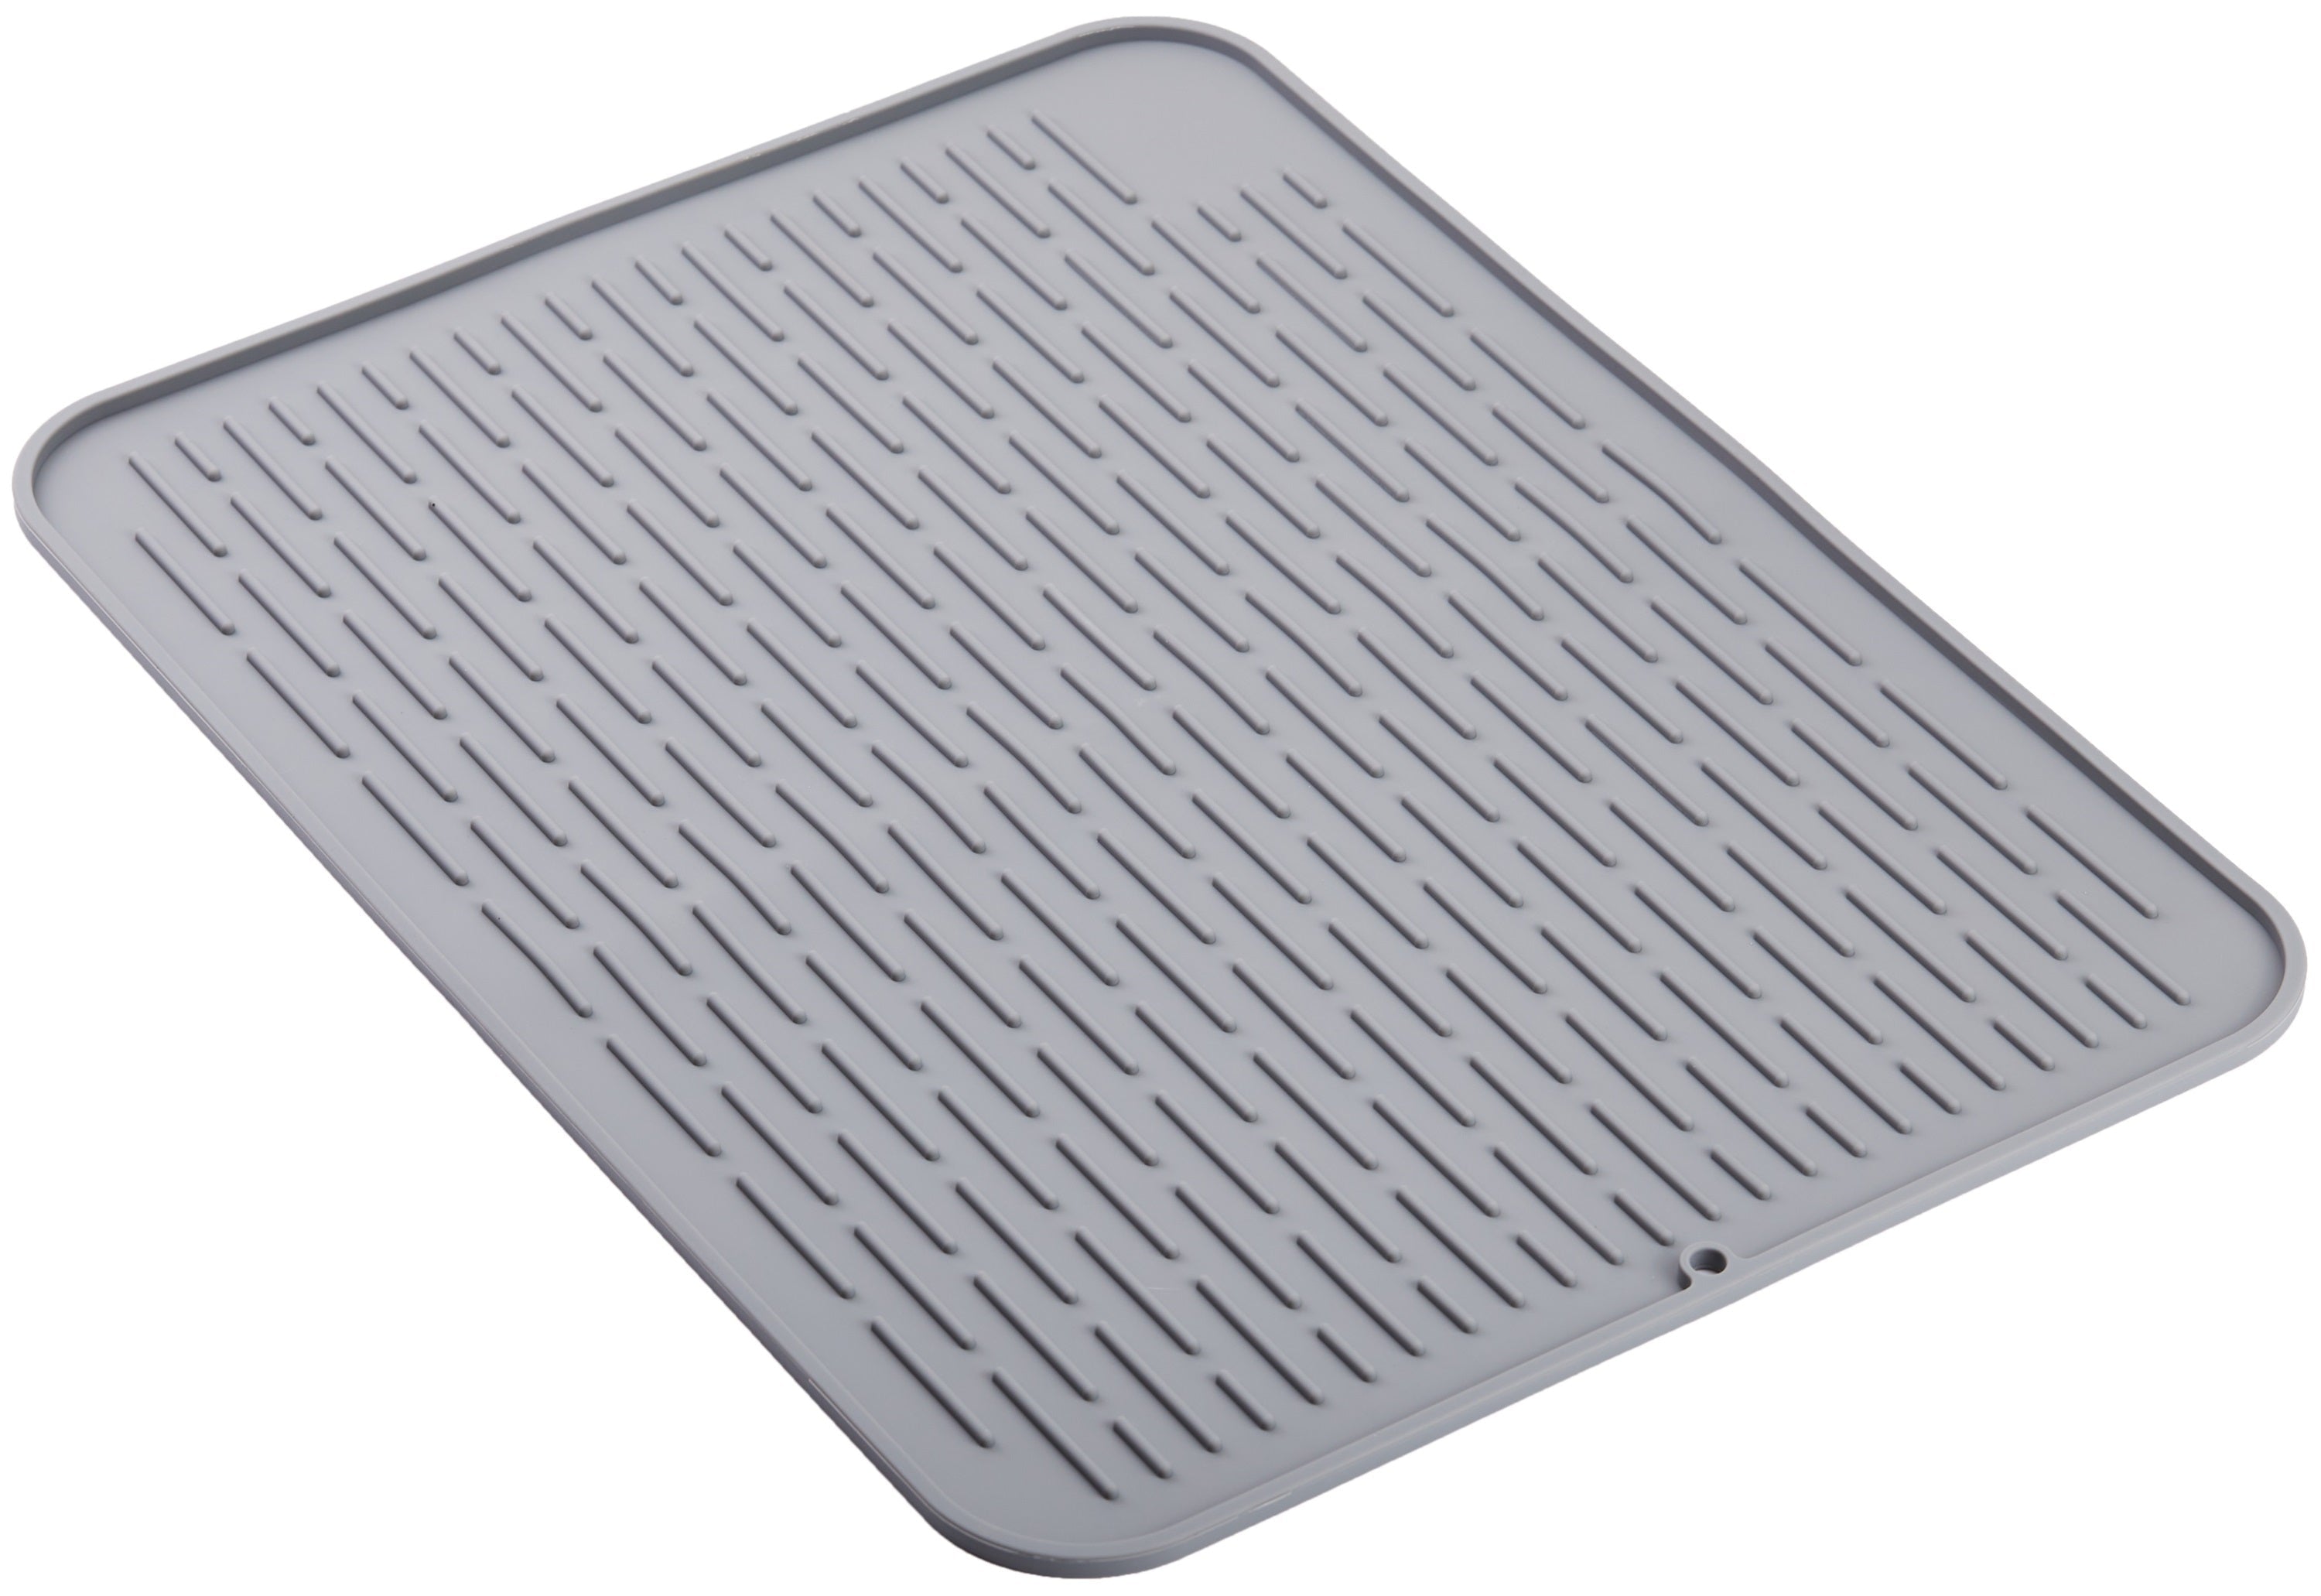 https://cdn.shopify.com/s/files/1/2091/6511/products/cheer-collection-silicone-dish-drying-mat-for-kitchen-counter-silicone-drying-pad-and-trivet-for-dishes-dishwasher-safe-and-heat-resistant-736659.jpg?v=1671777547